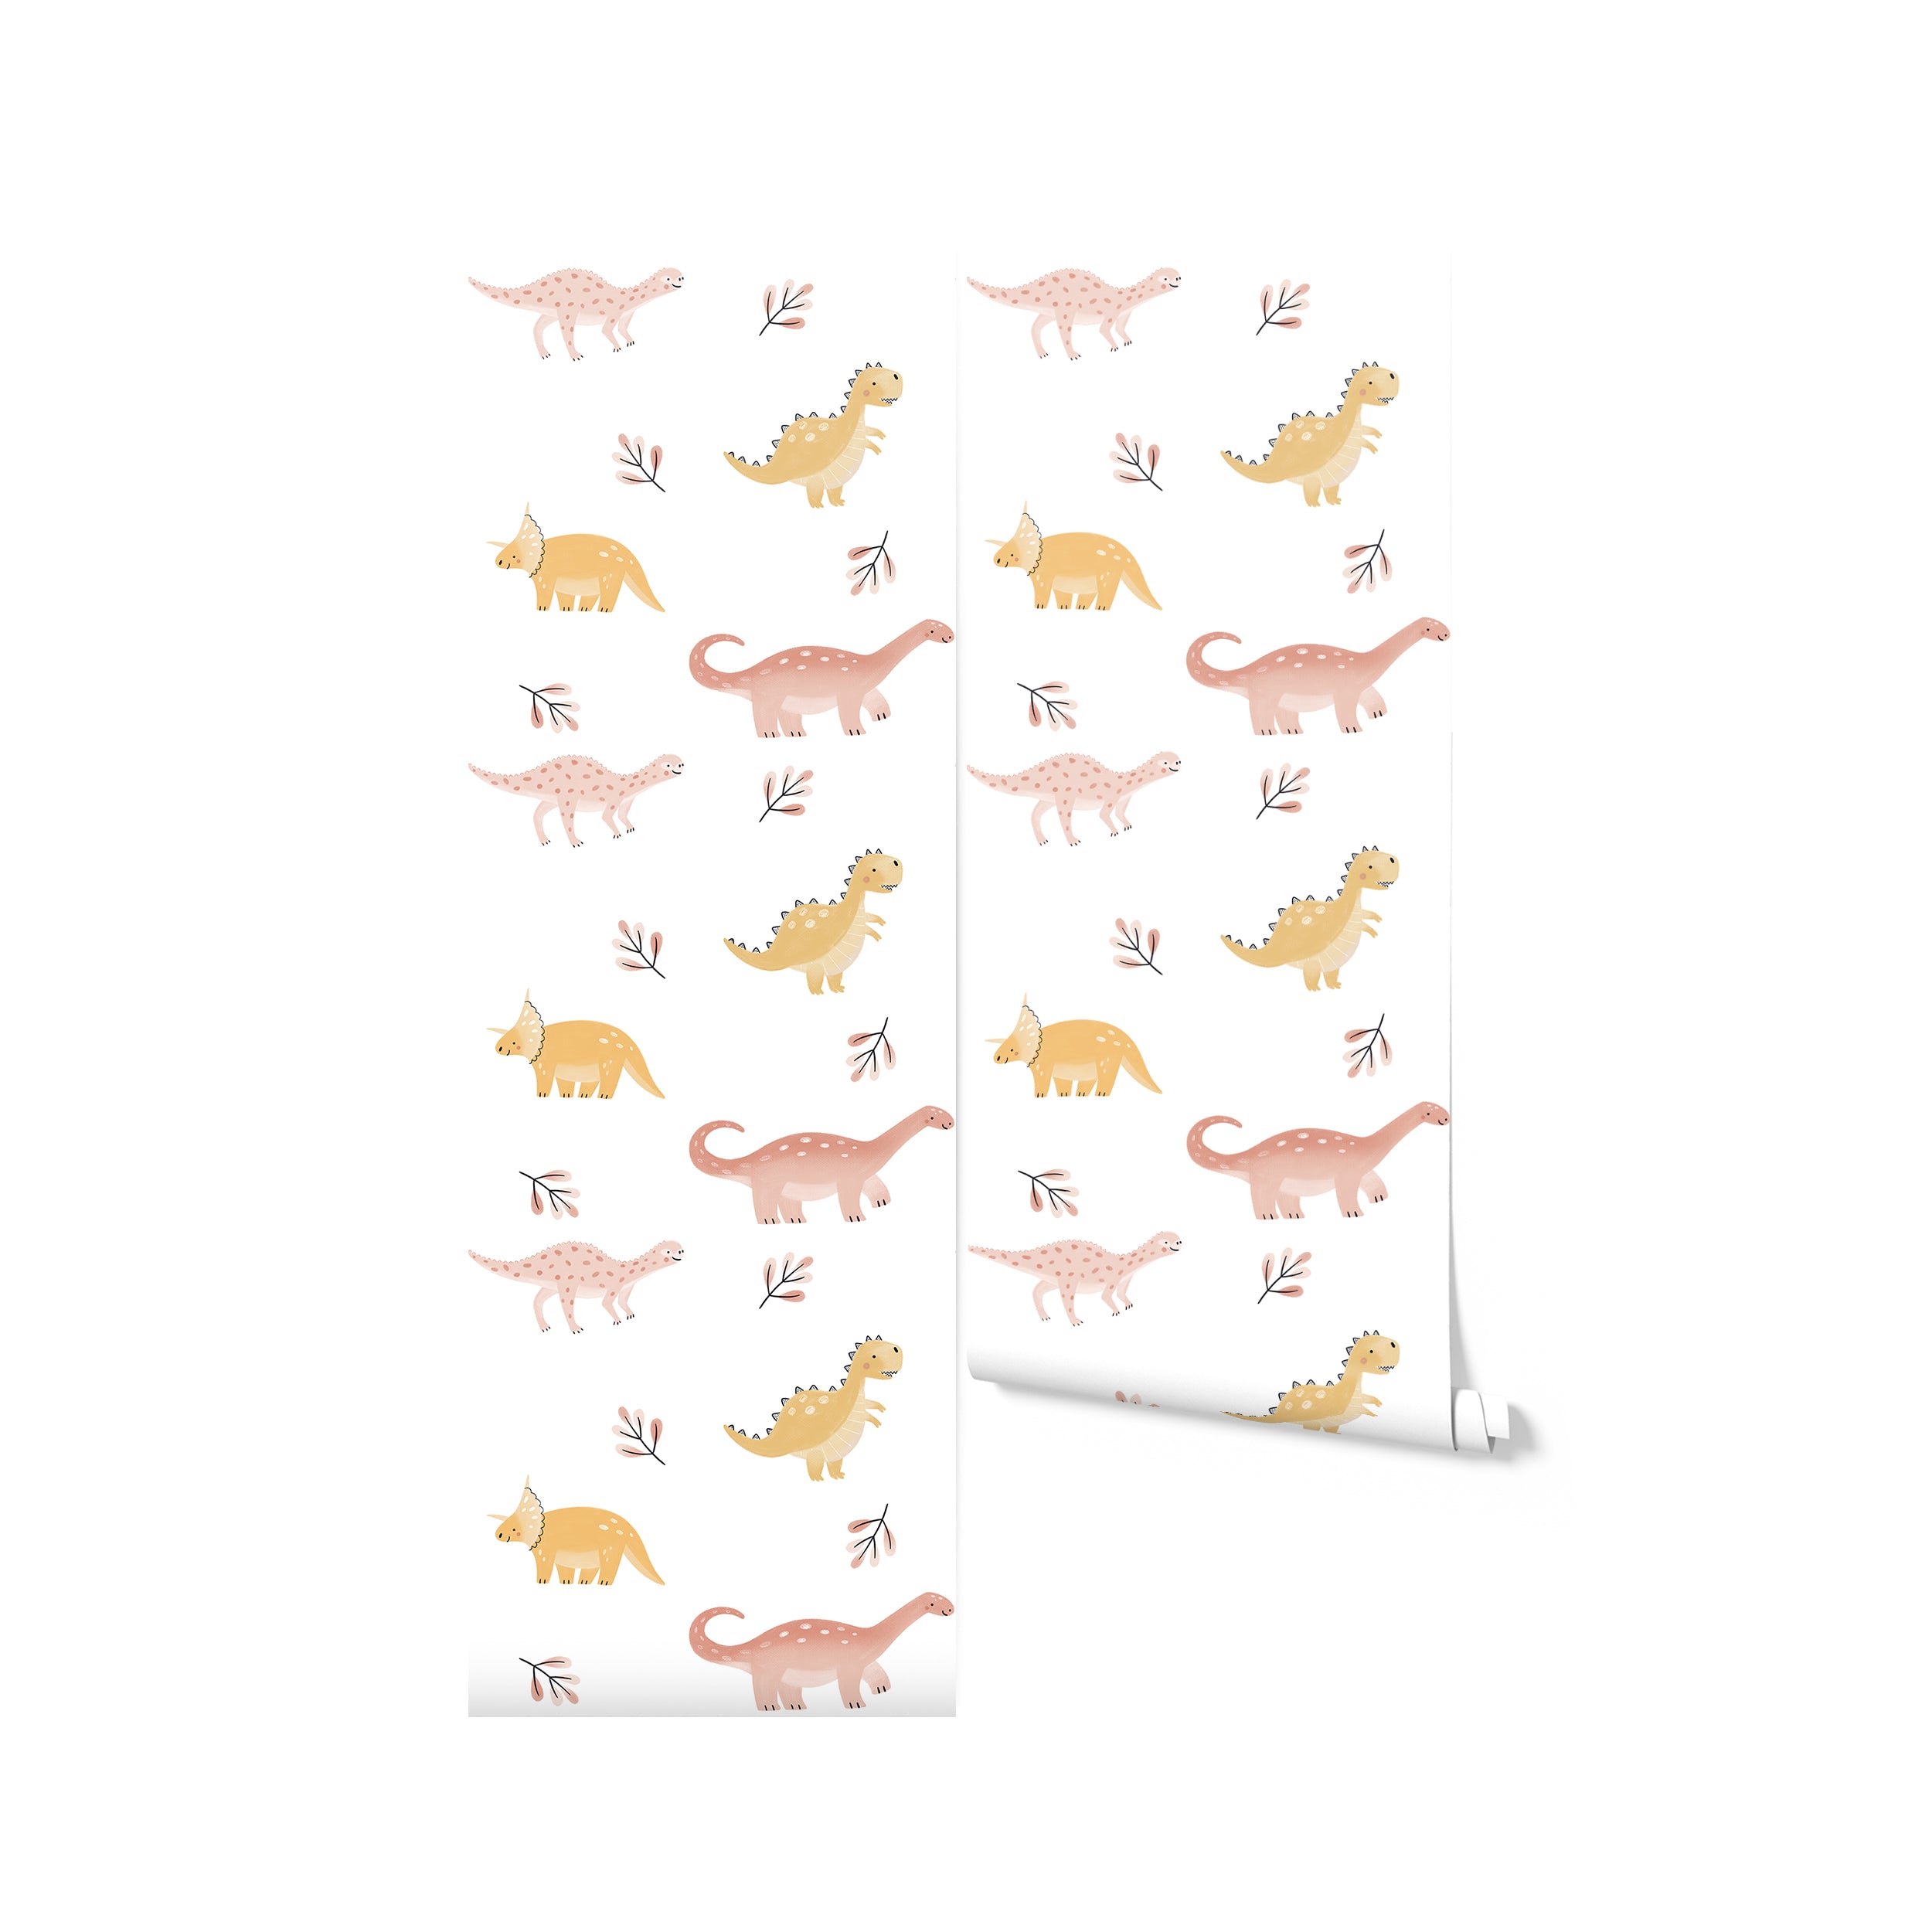 Roll of 'Dino World Kids Wallpaper' displaying a playful and educational design with cartoon dinosaurs in pink and yellow and small plant motifs on a white base, ideal for children's rooms to inspire creativity and a love of prehistoric creatures